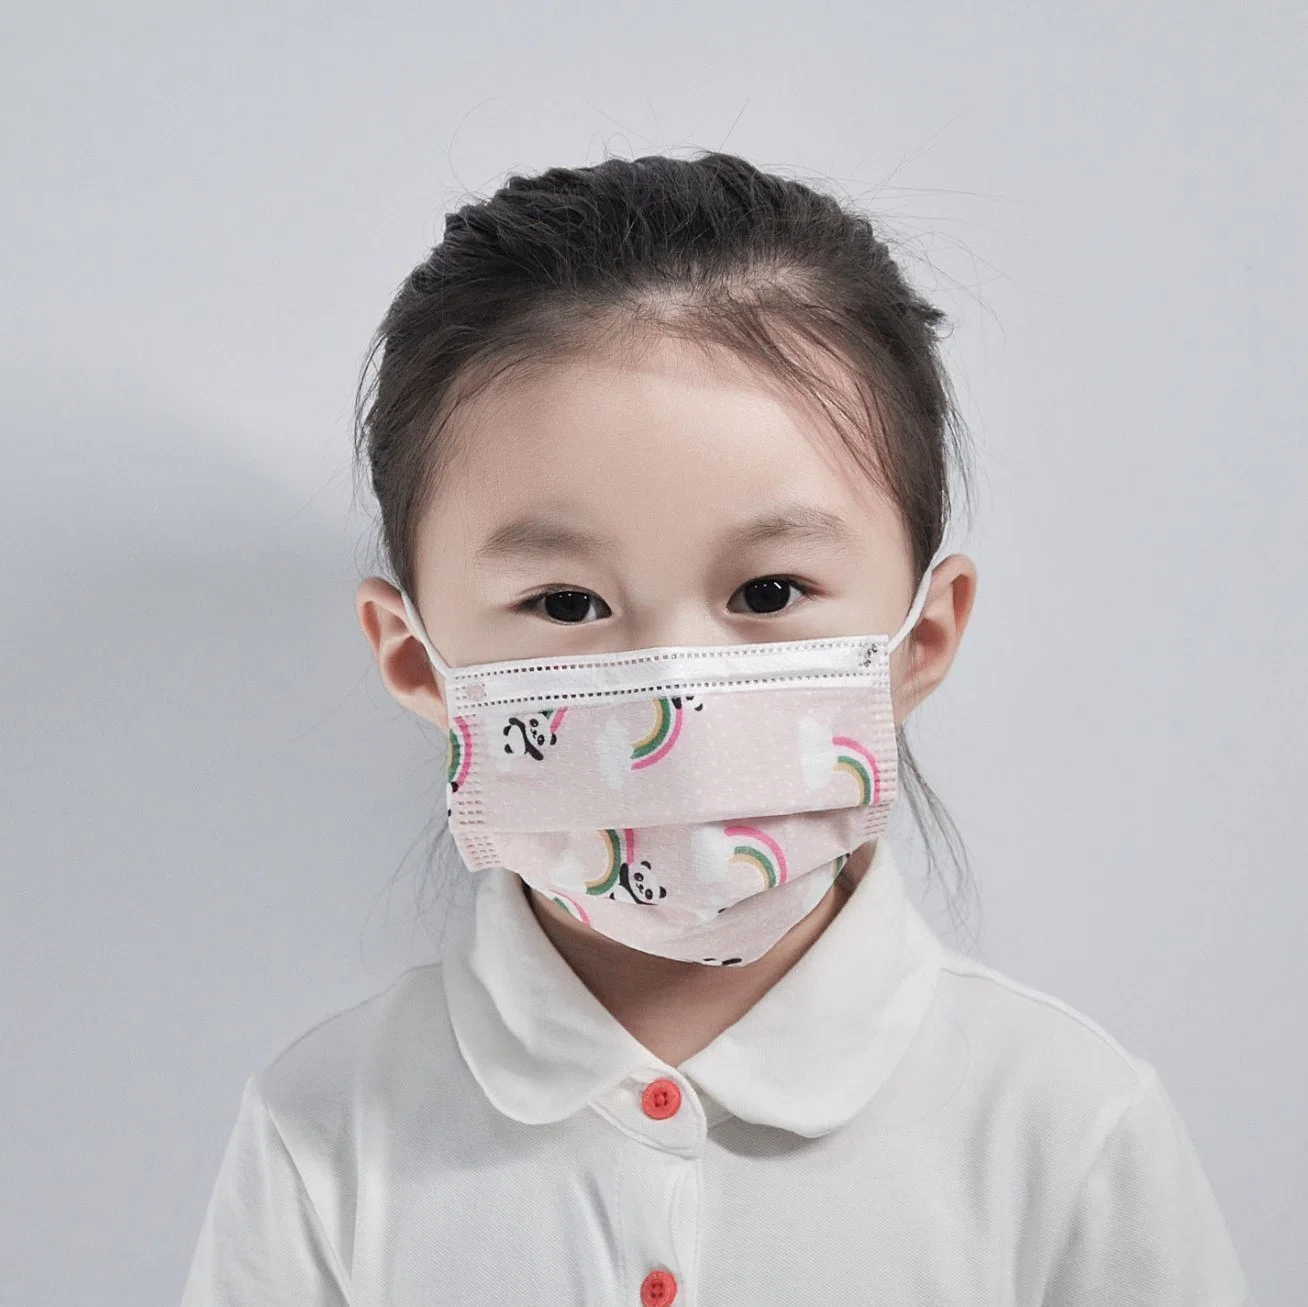 50 PCS Disposable Kids Face Mask for Boys and Girls, 3-Ply Breathable Childrens Mask for Kids School Daily Use, Mask Anti Dust/Smog